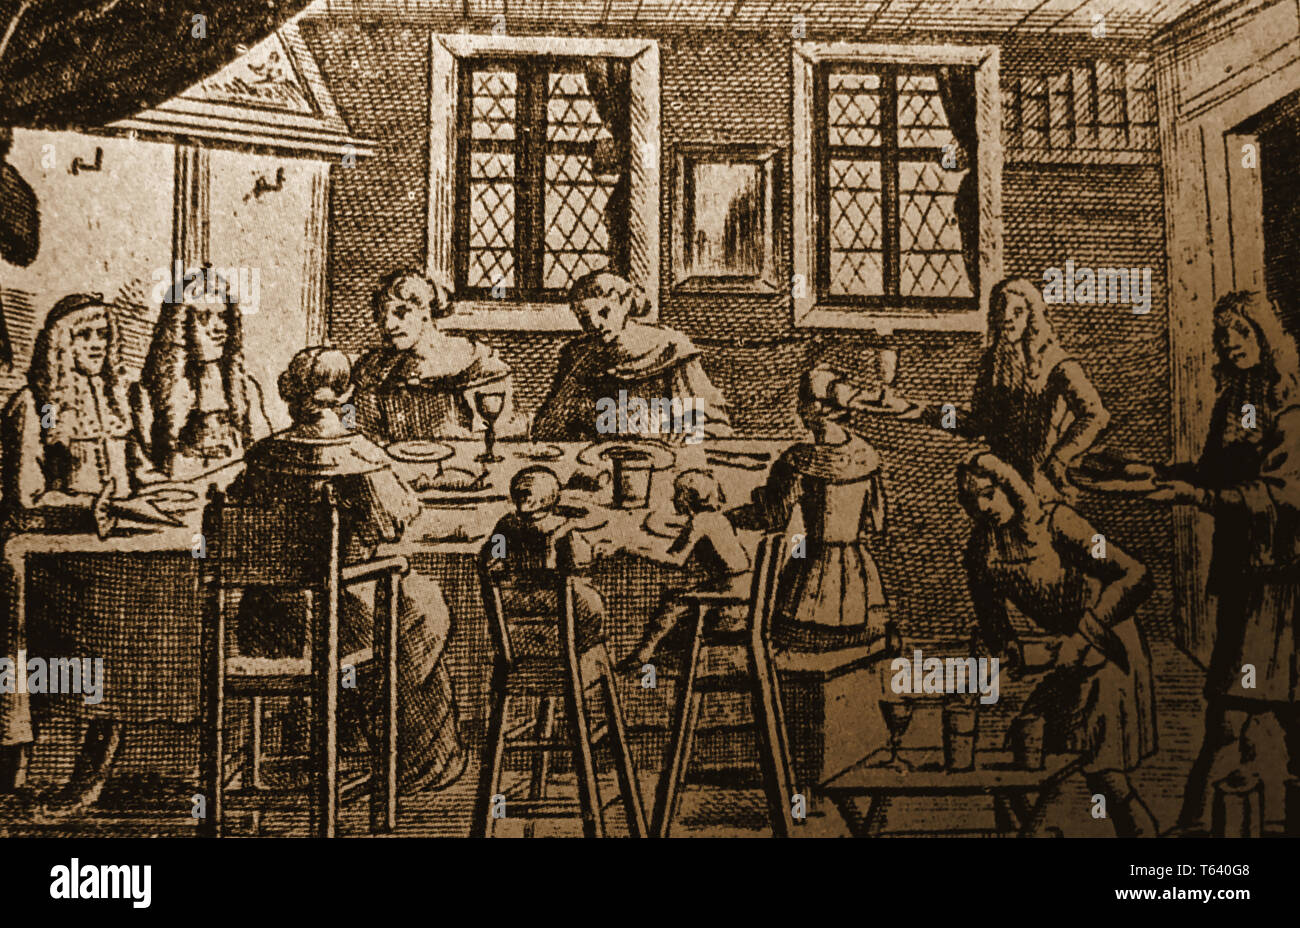 An old print of a 17th century domestic scene in an upper class family house showing servants serving food and wine, a mirror on the wall and two infants in high chairs. Stock Photo